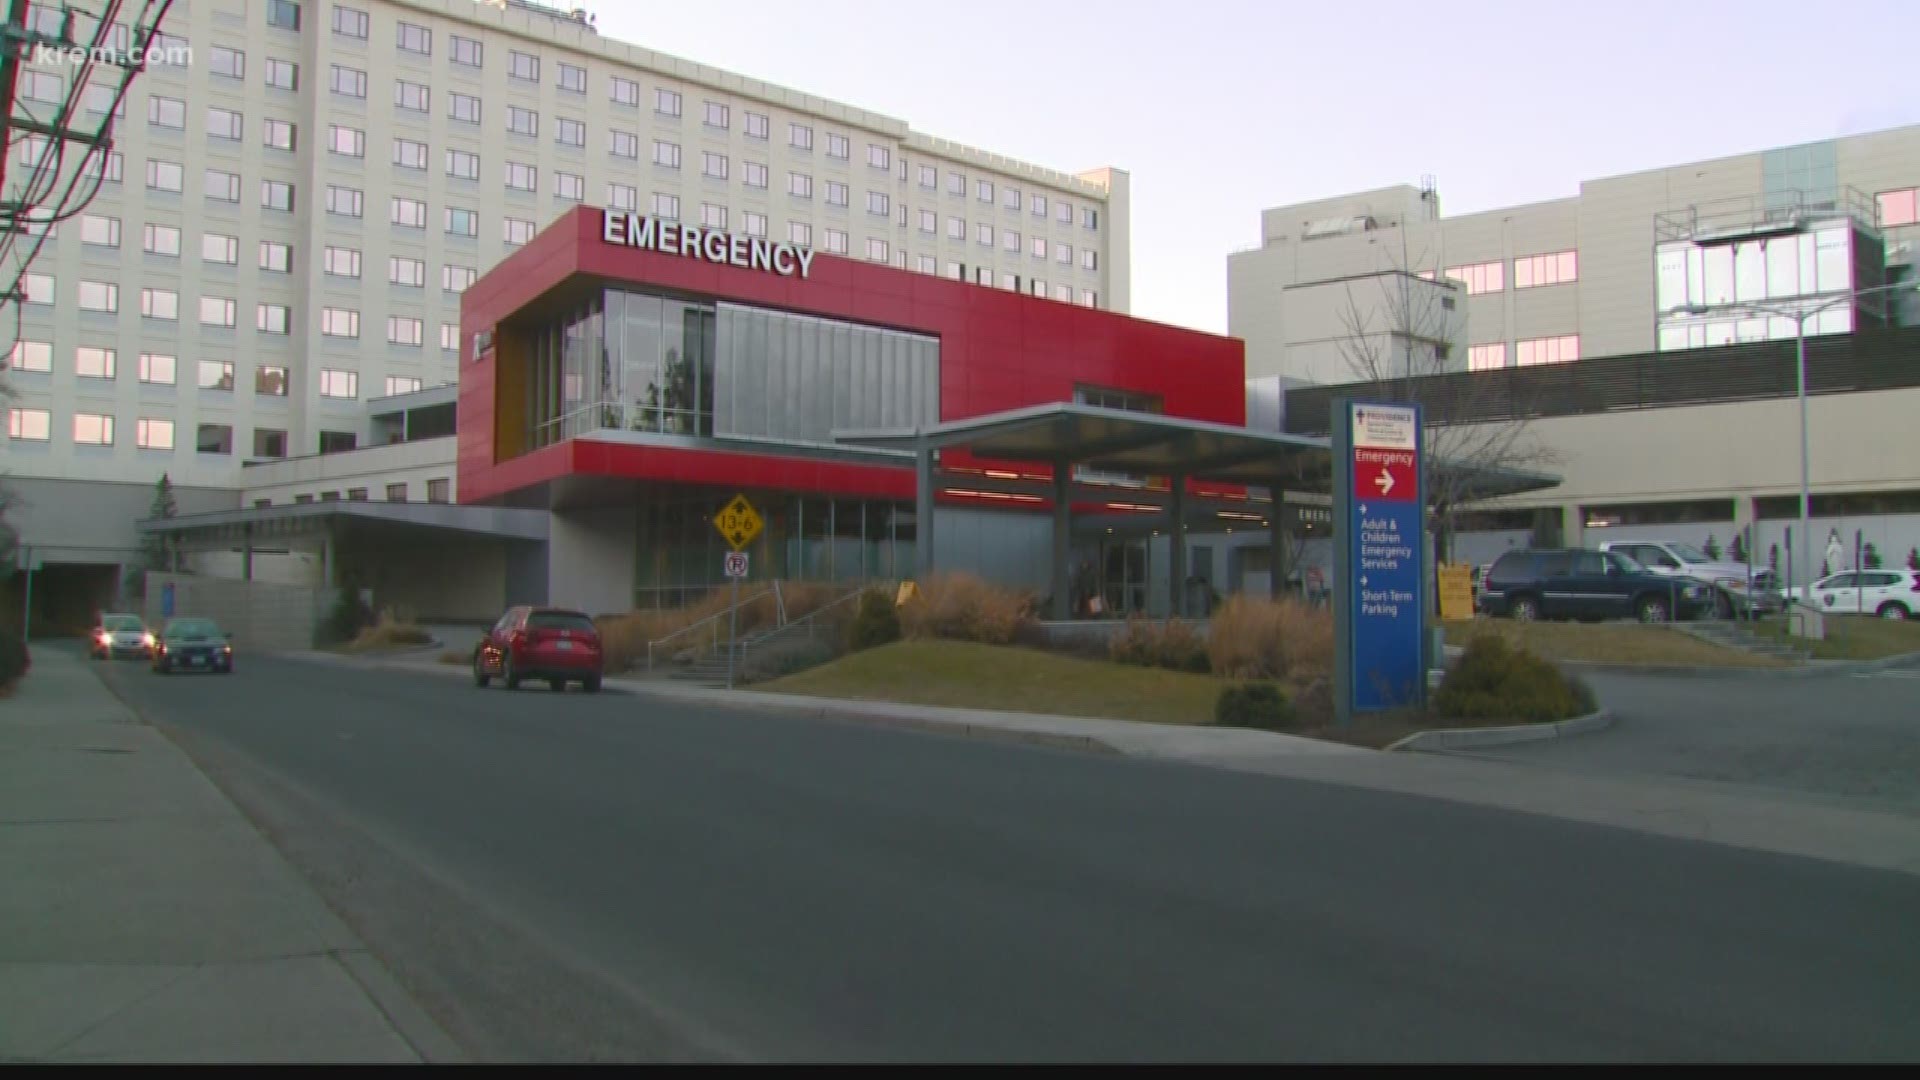 After four coronavirus patients were transferred to Spokane's Sacred Heart, many people are wondering who is footing the bill for their care.